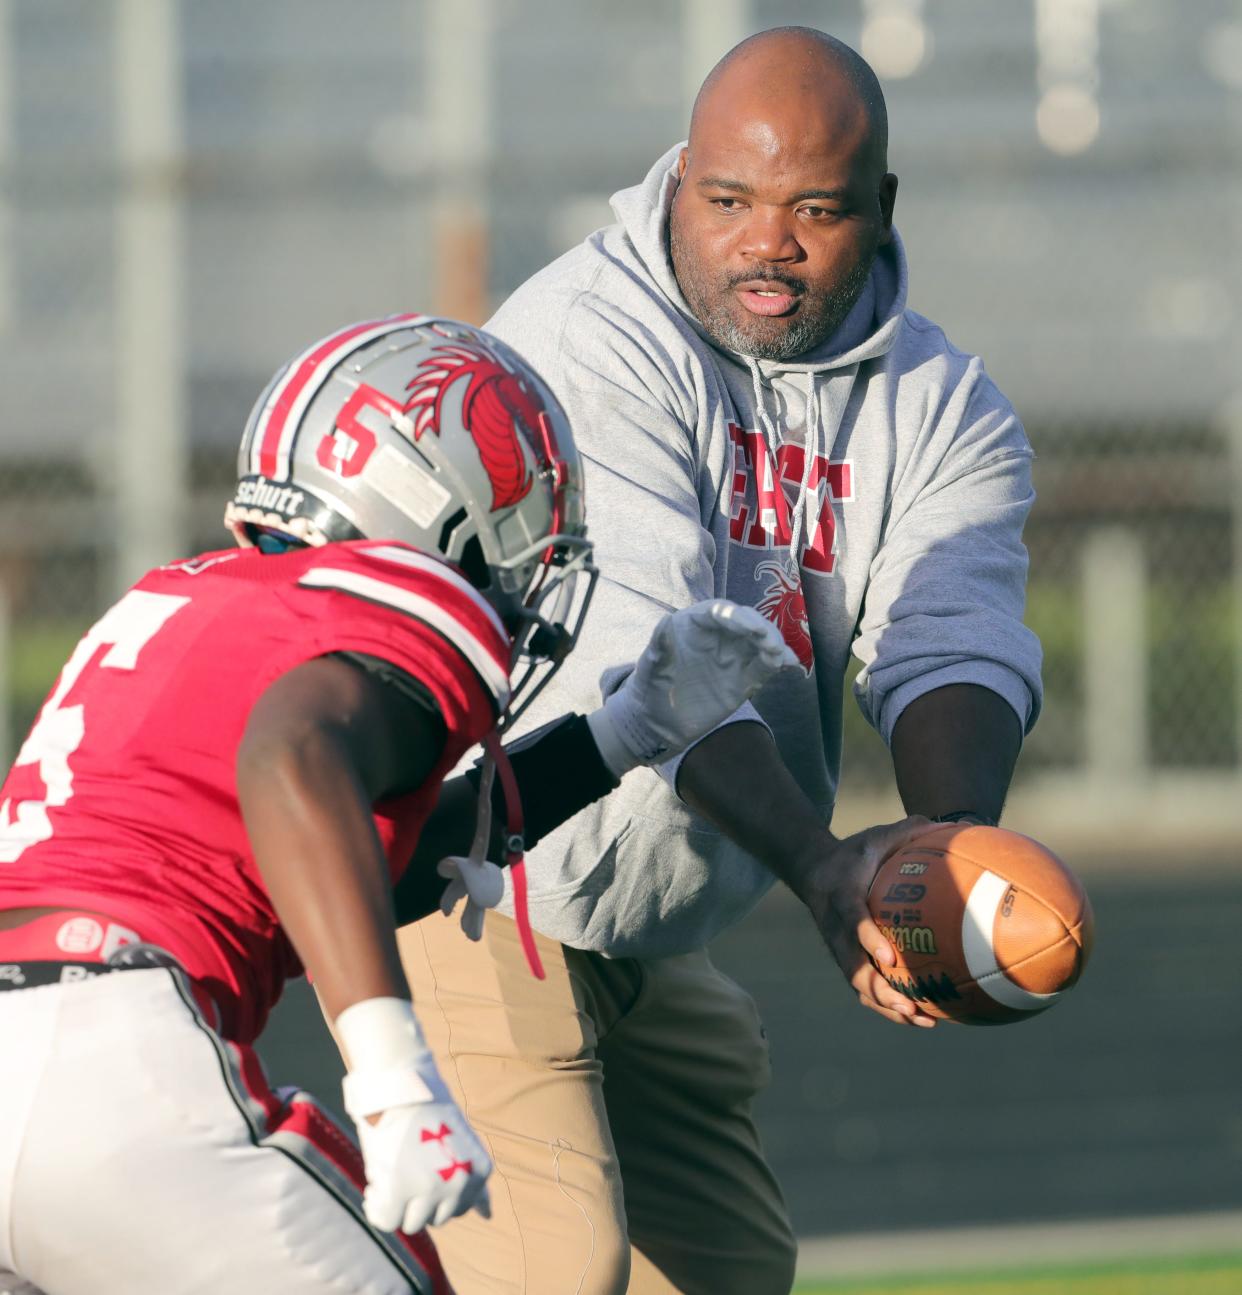 East head coach Marques Hayes has been a fixture on the Dragons sideline and is helping his athletes earn college scholarships.